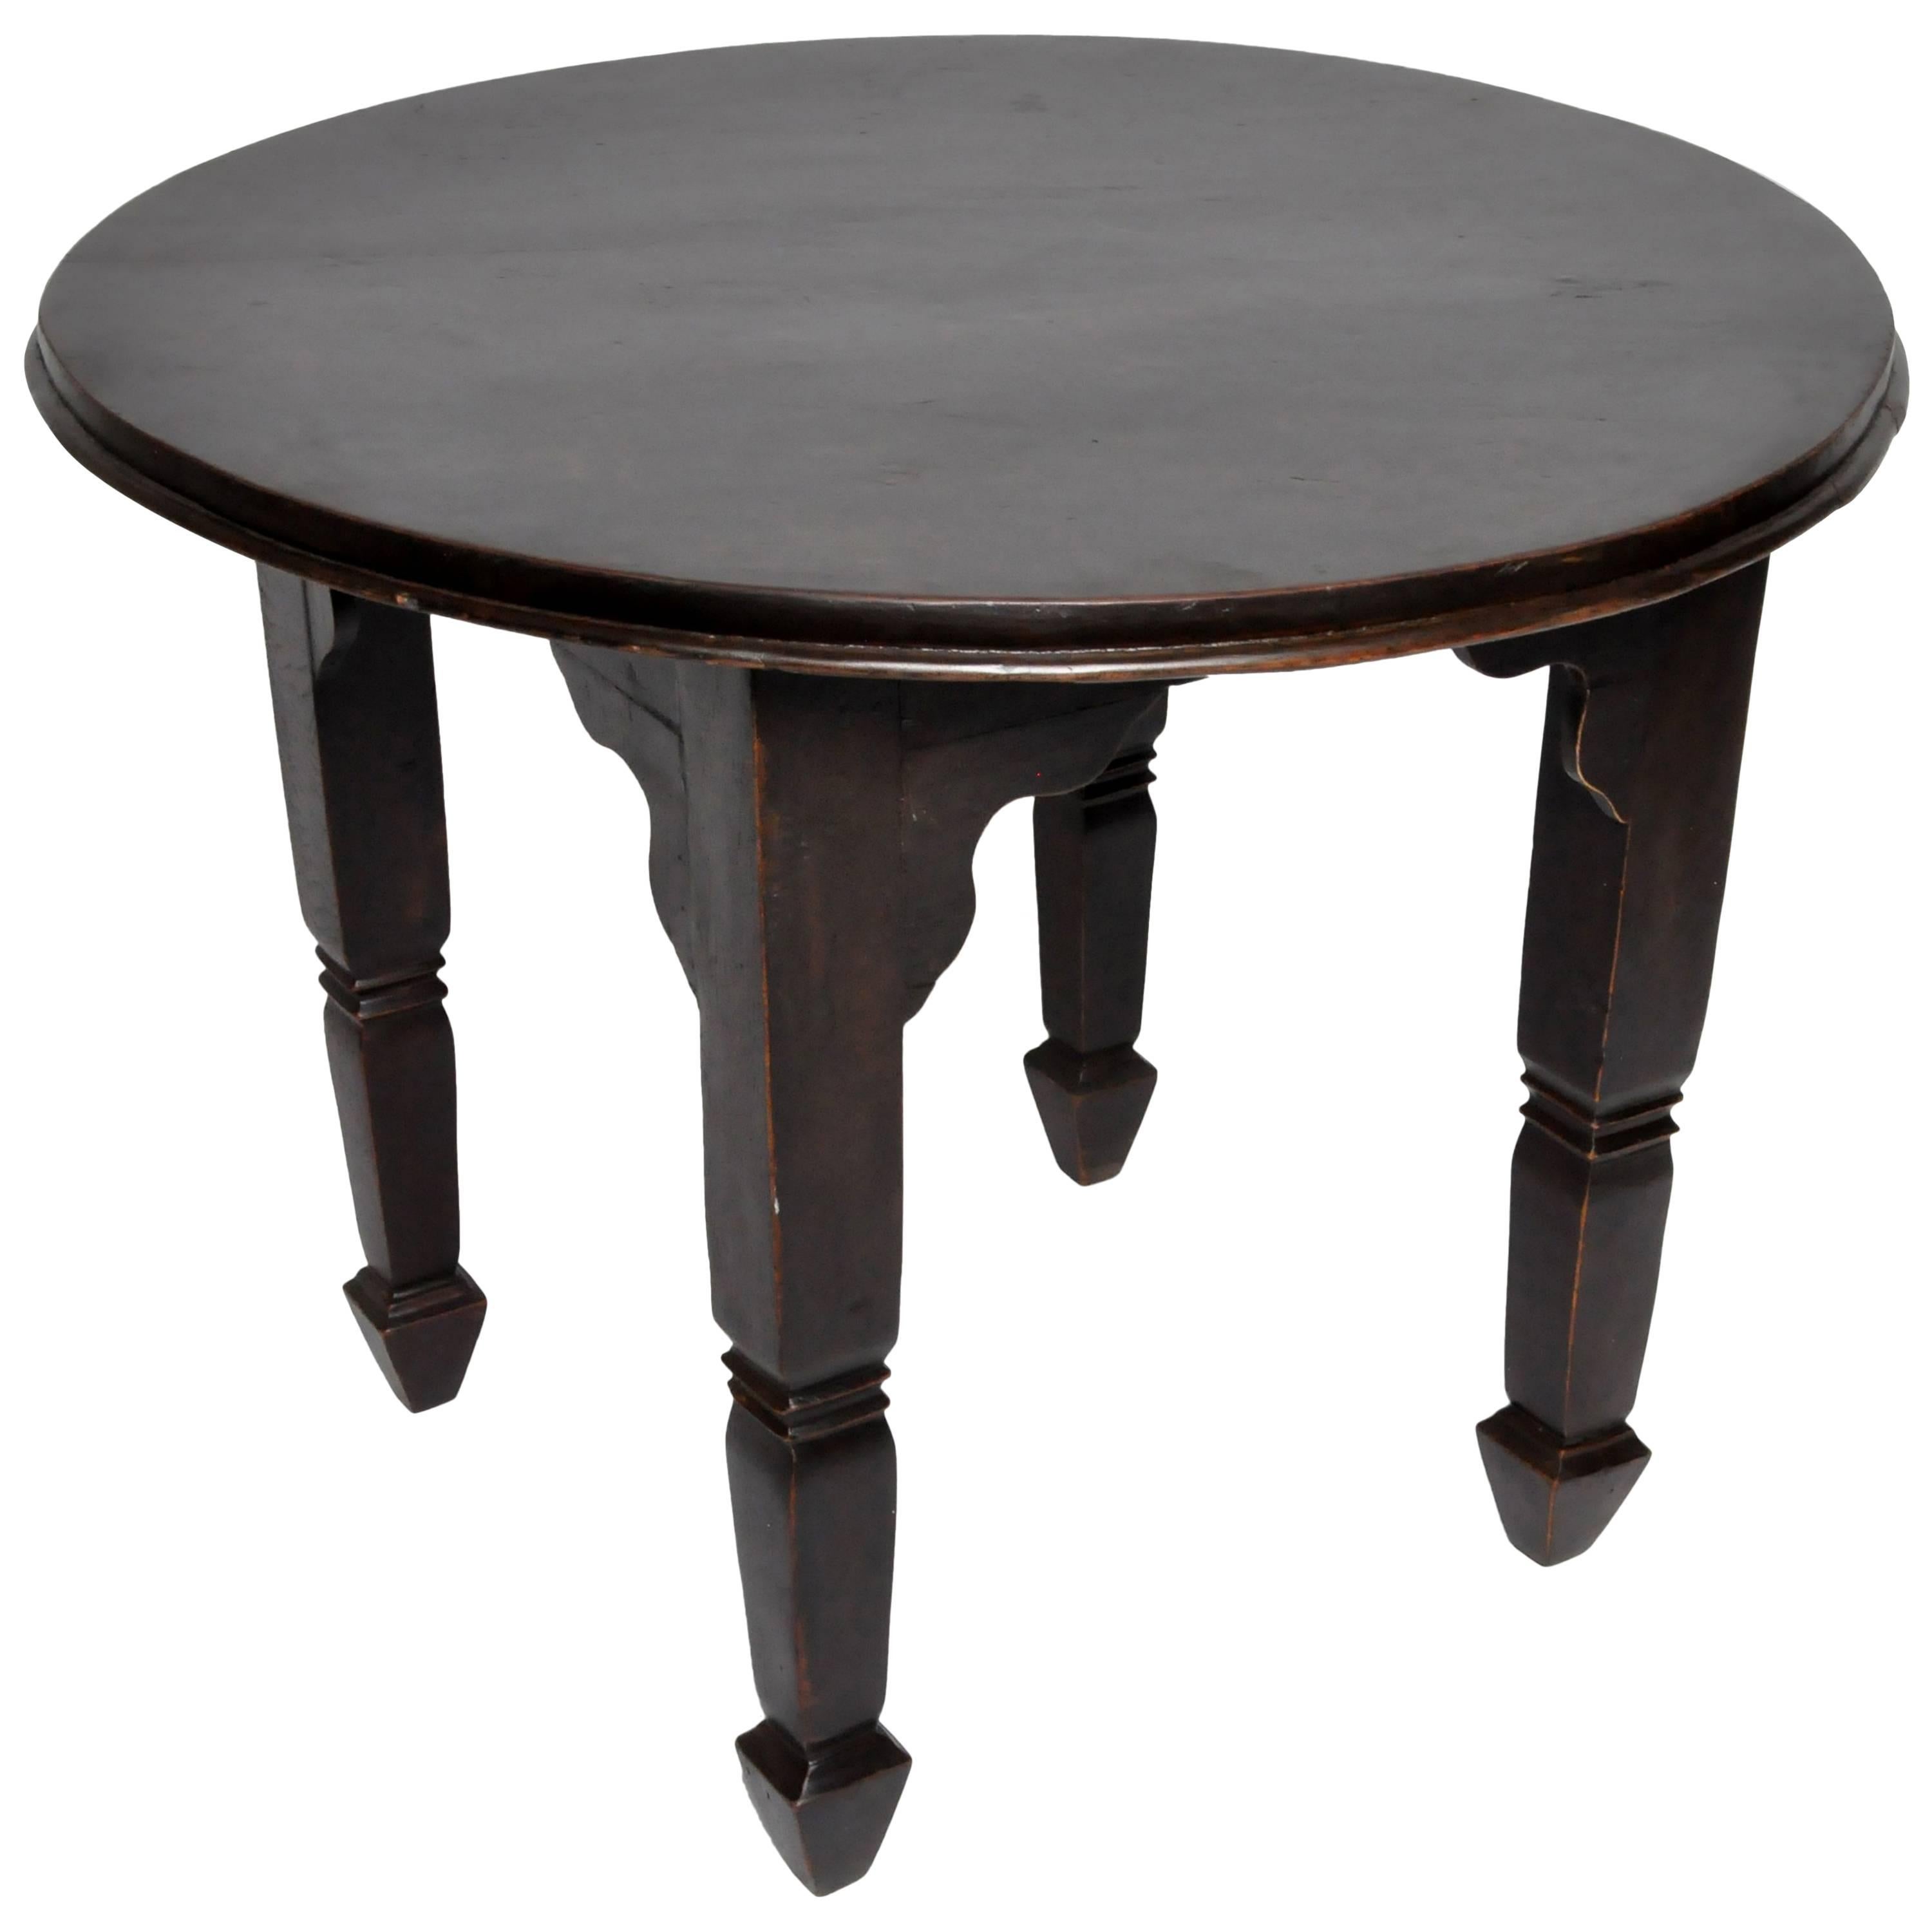 British Colonial Burmese Round Table